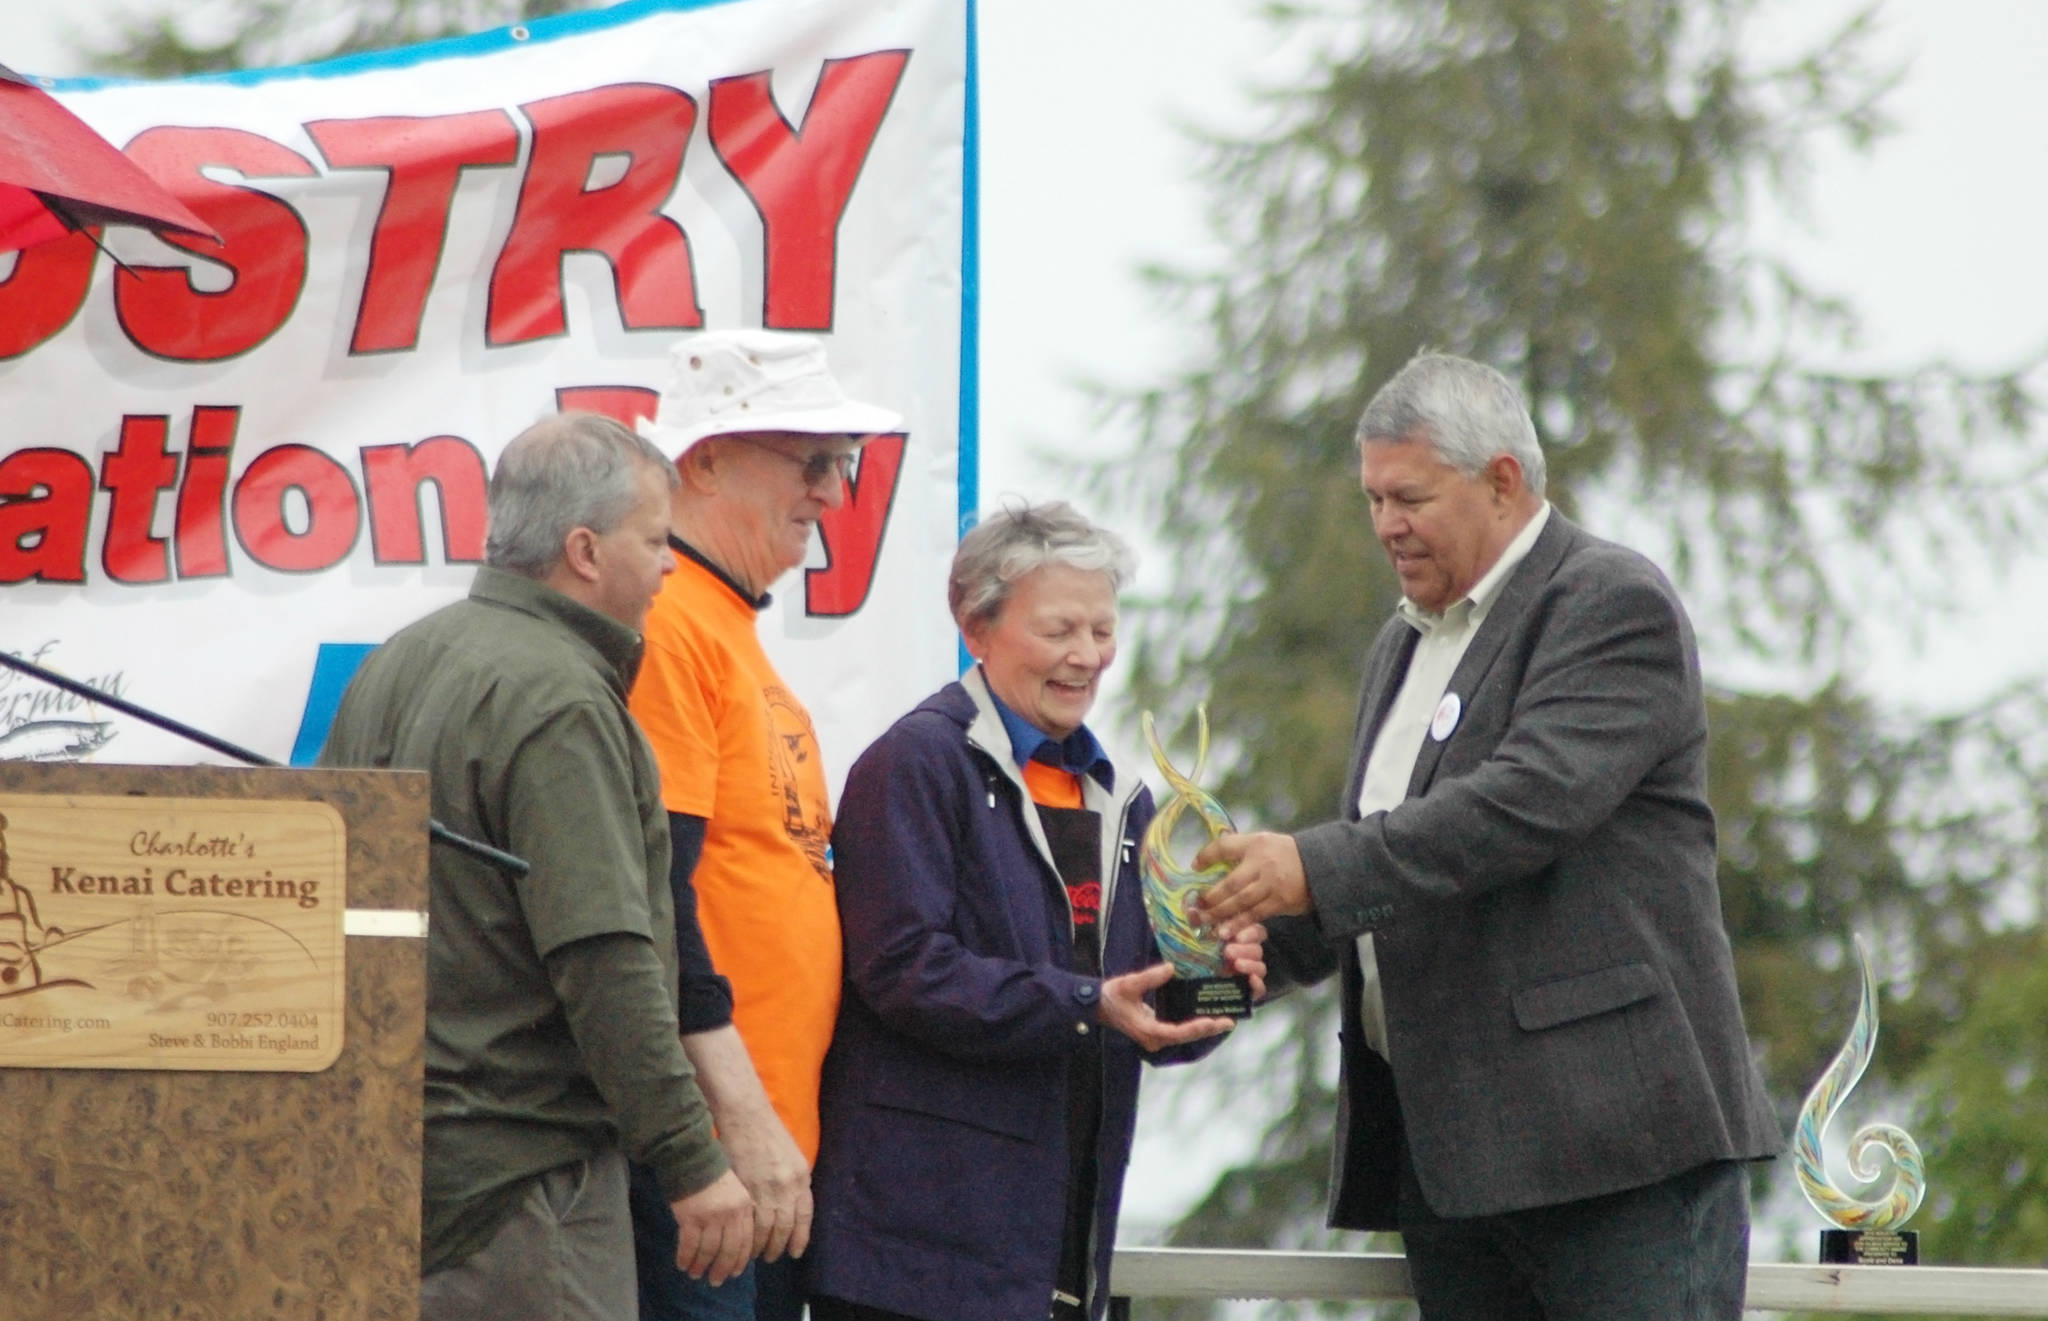 Borough Mayor Charlie Pierce (right) and Tim Navarre (far left) present an award to Will and Jane Madison for their work on the annual Industry Appreciation Day event on Saturday, Aug. 25, 2018 in Kenai, Alaska. (Photo by Elizabeth Earl/Peninsula Clarion)